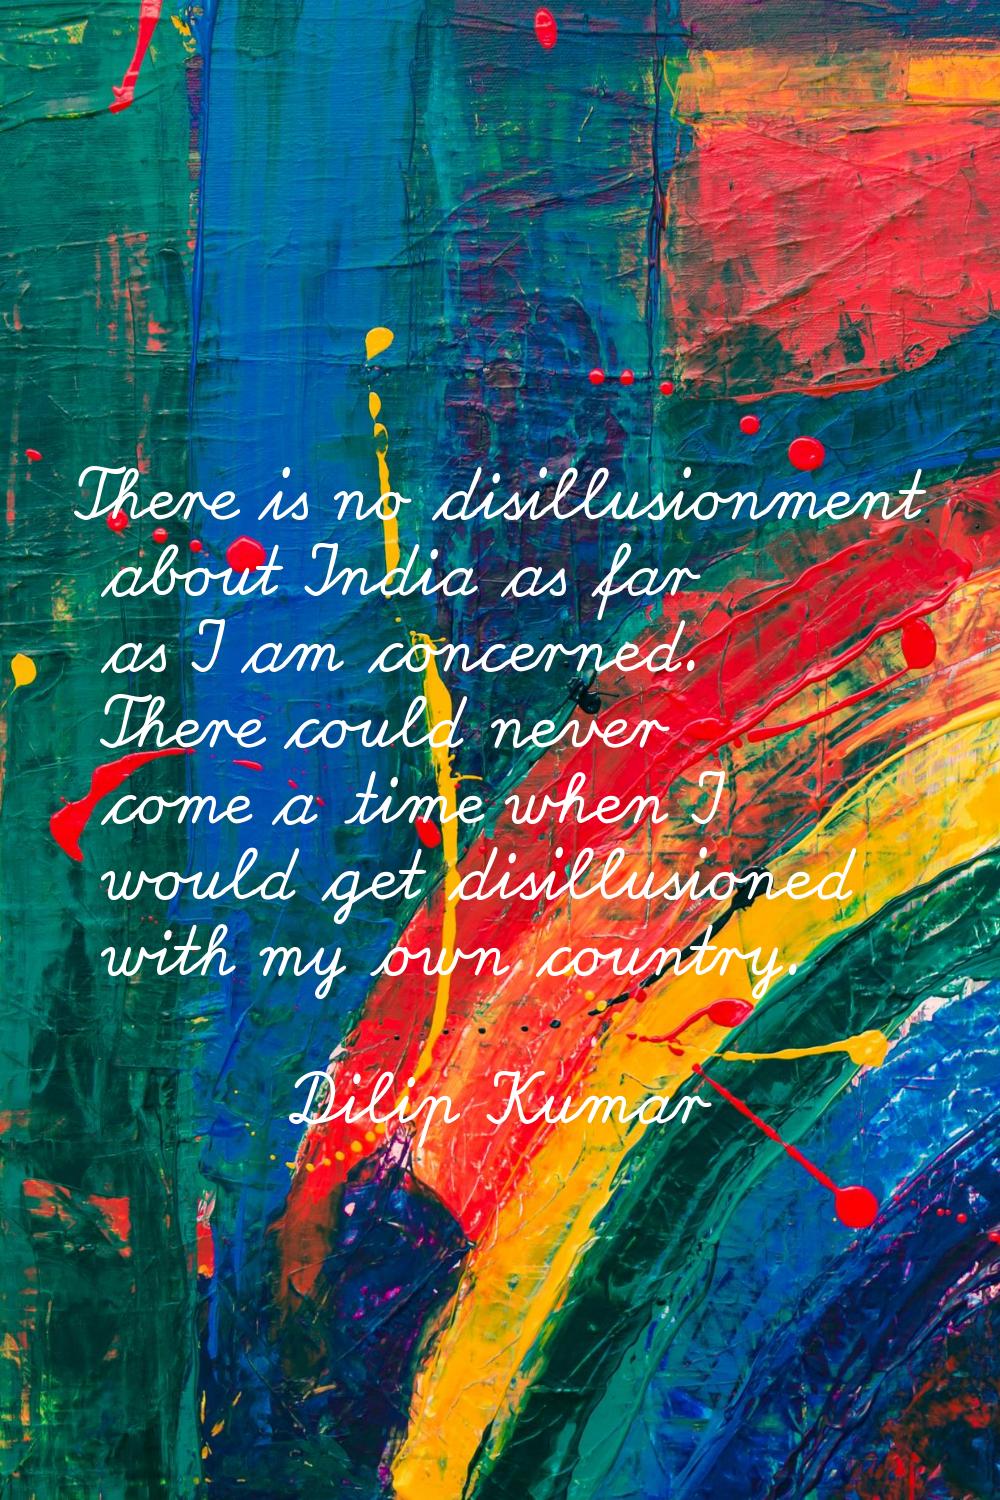 There is no disillusionment about India as far as I am concerned. There could never come a time whe